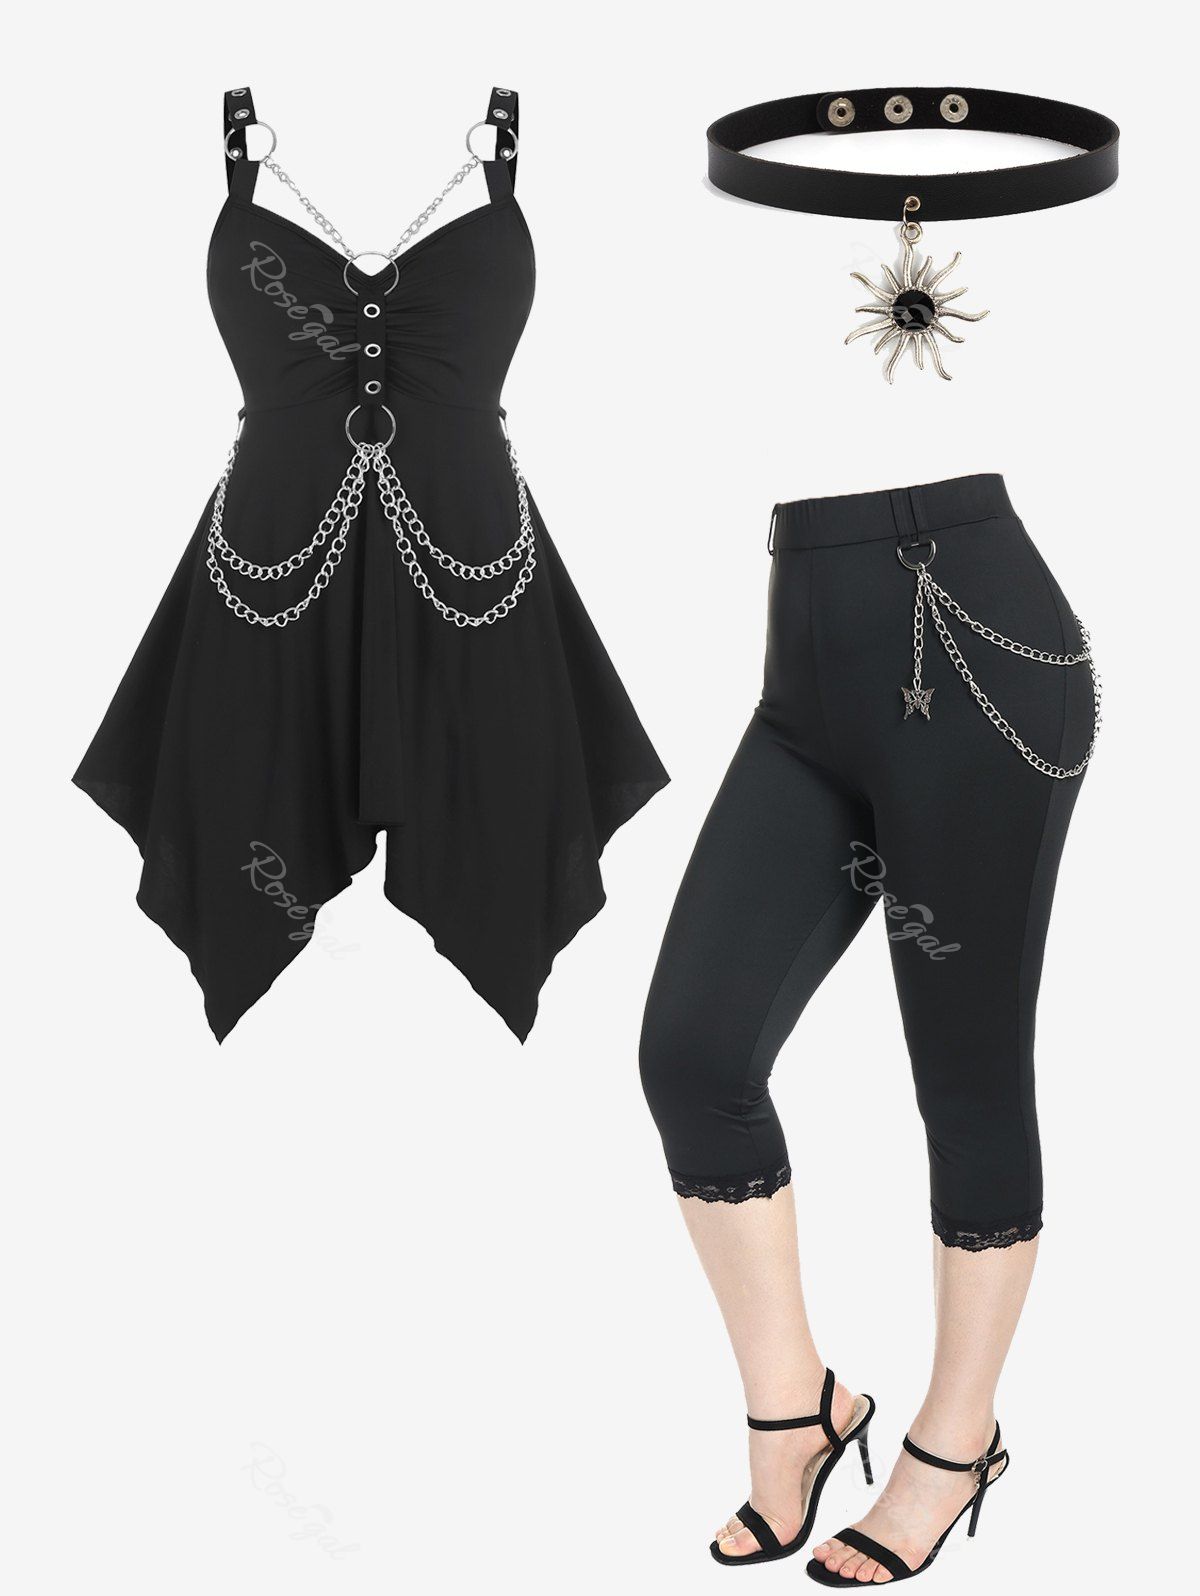 Buy Chains Handkerchief Top and Lace Trim Leggings Gothic Plus Size Summer Outfit  